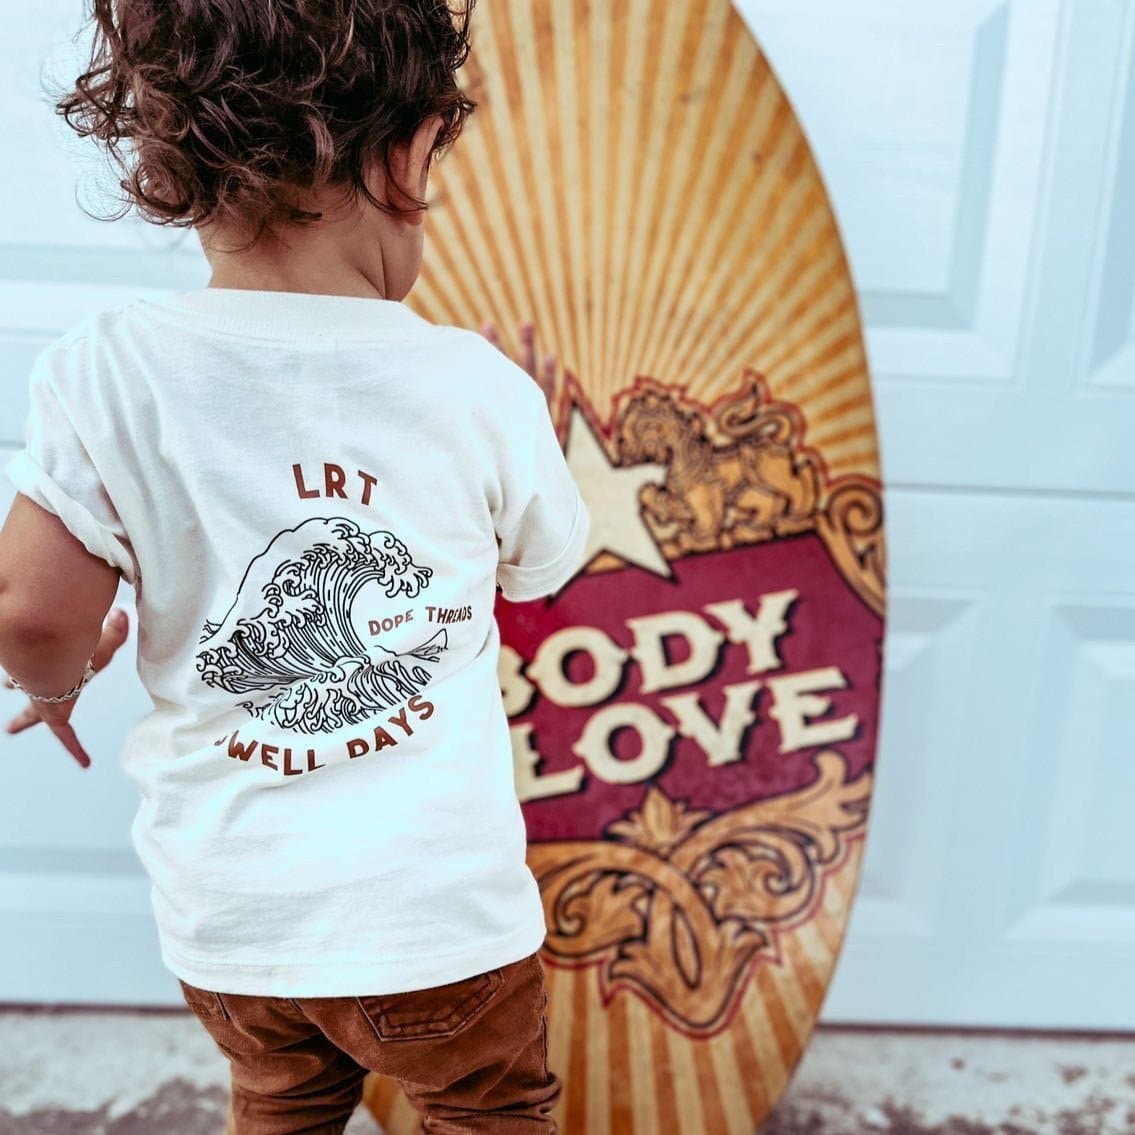 Dope Threads Swell Days Tee - LITTLE RAD THINGS